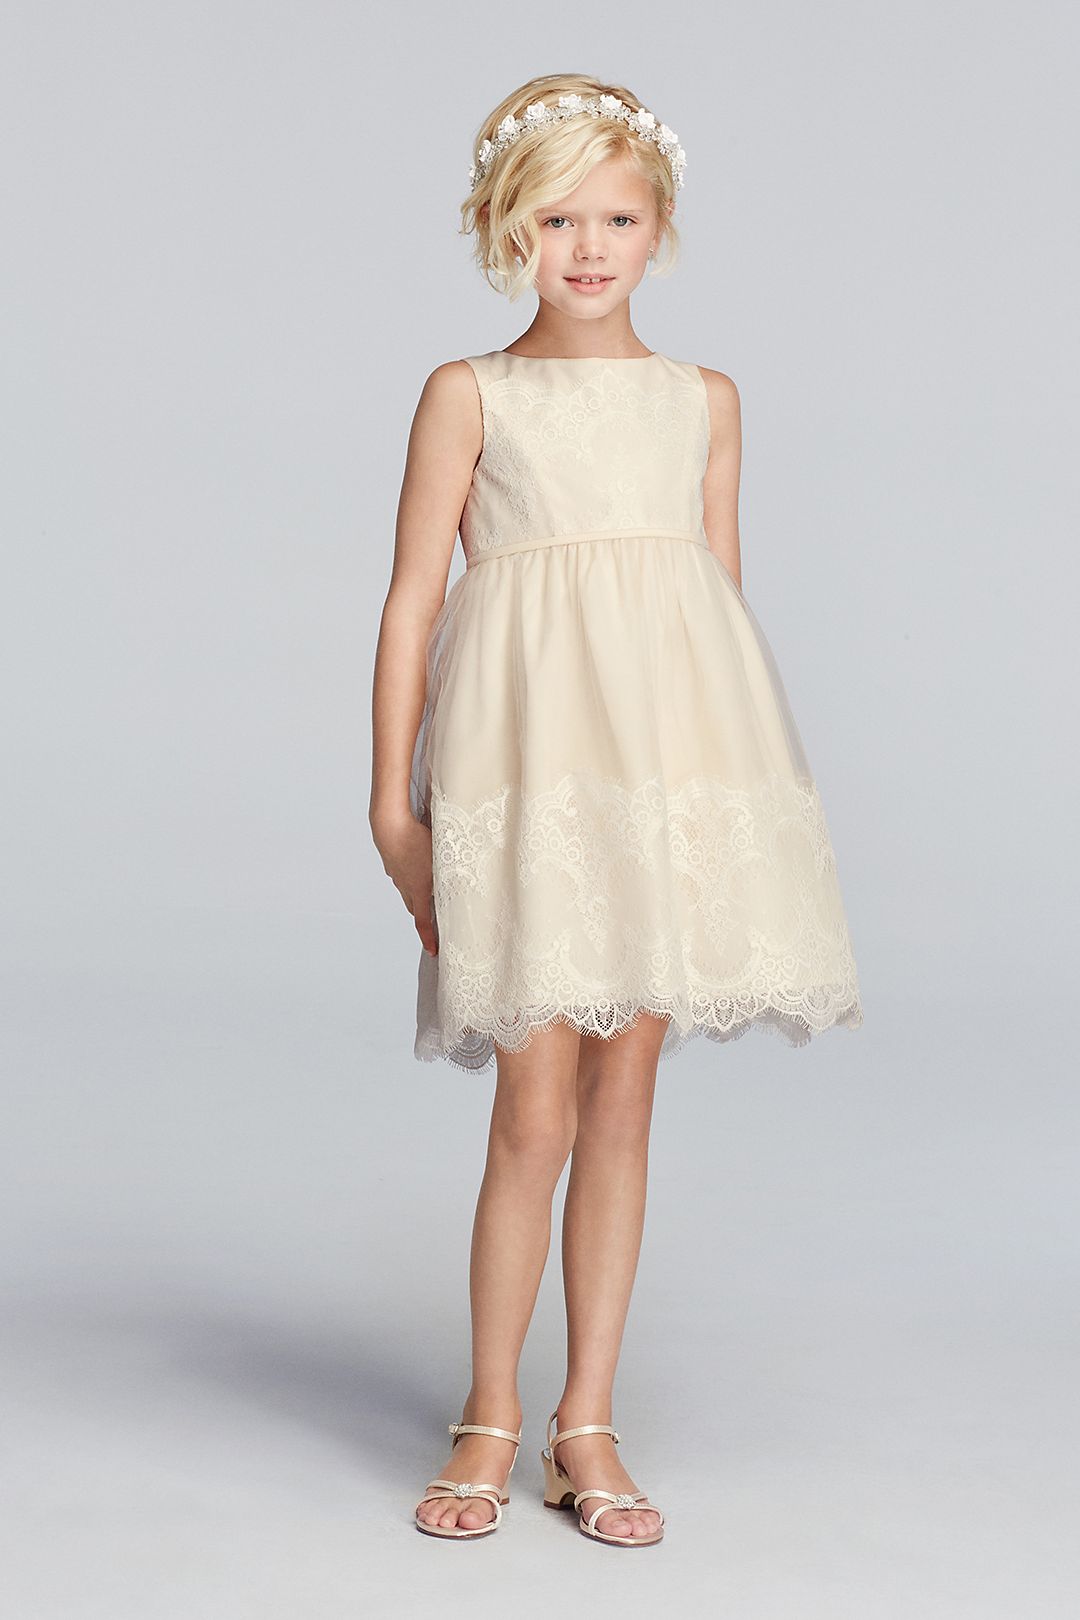 Tank Tulle Flower Girl Dress With Lace Applique Image